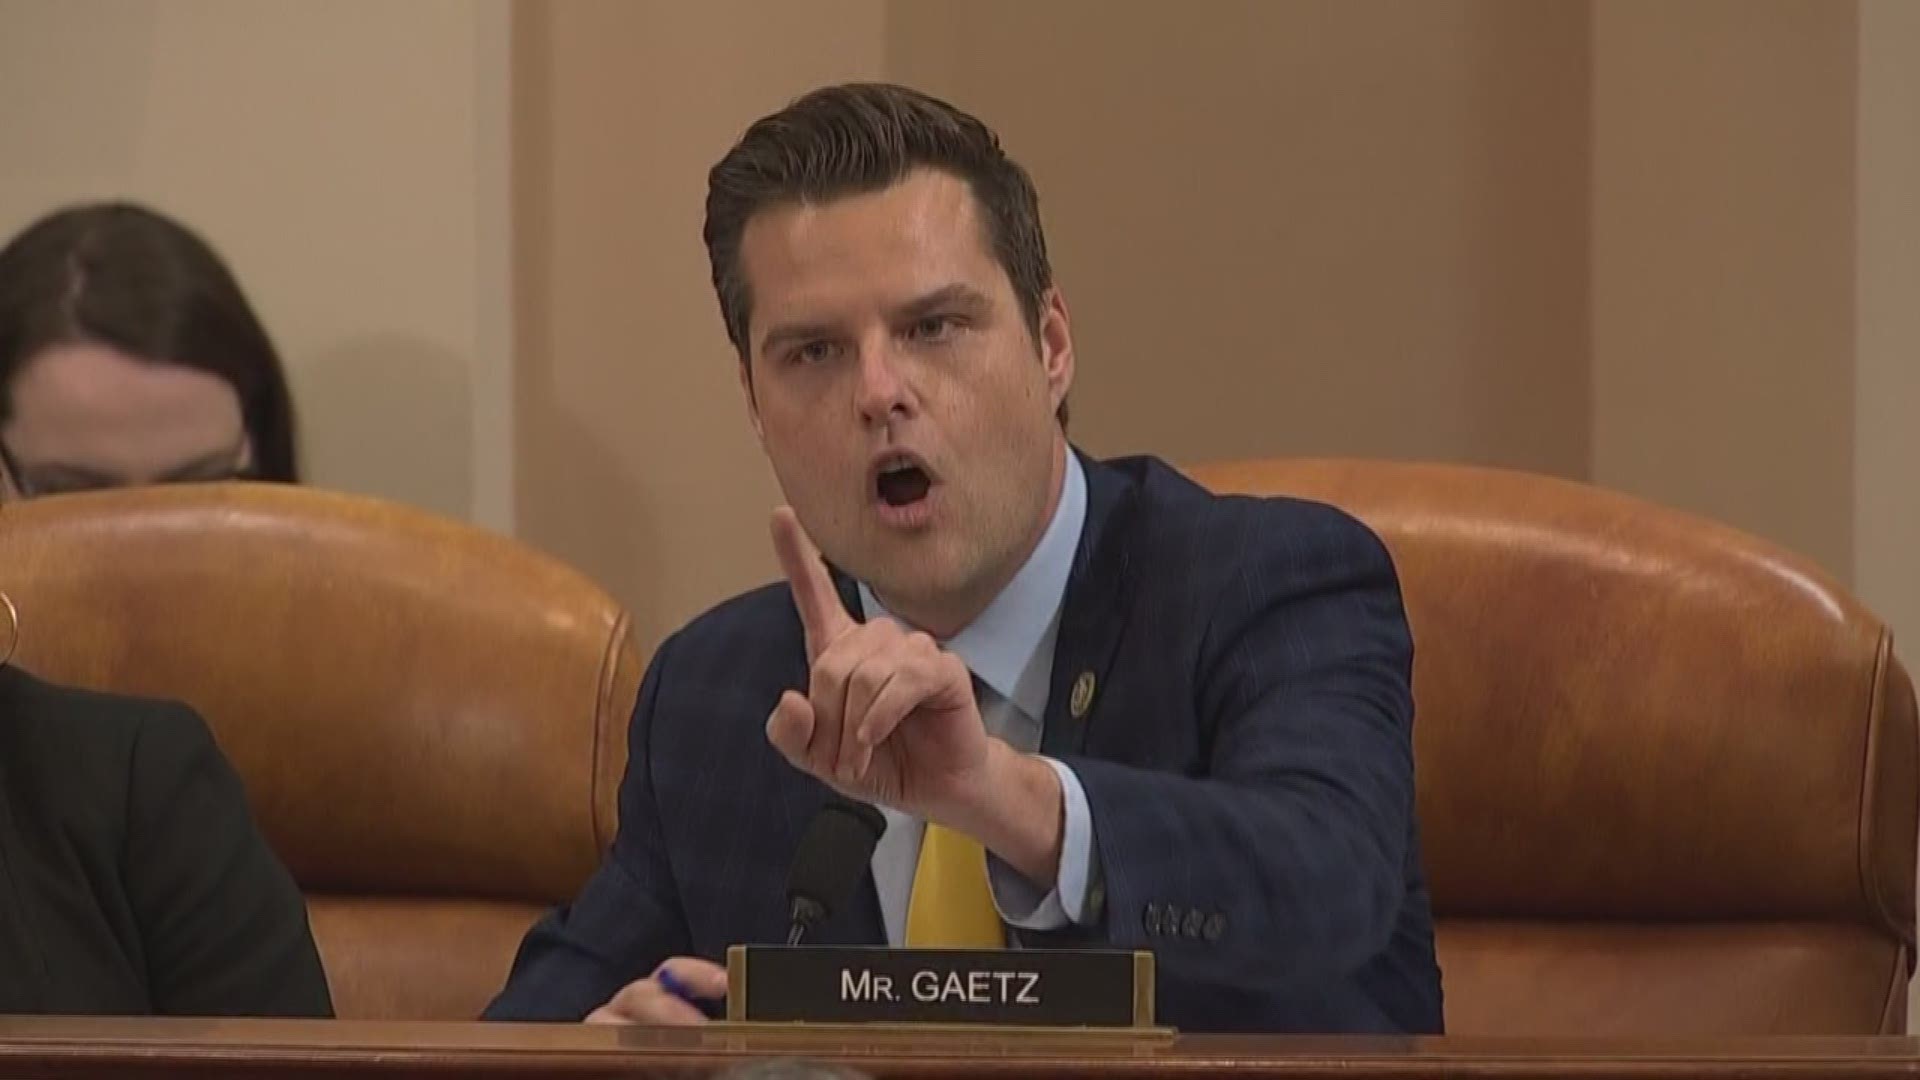 Florida Rep. Matt Gaetz told impeachment hearing witness Stanford Law professor Pamela S. Karlan that invoking the name of the president's teen son discredits her.